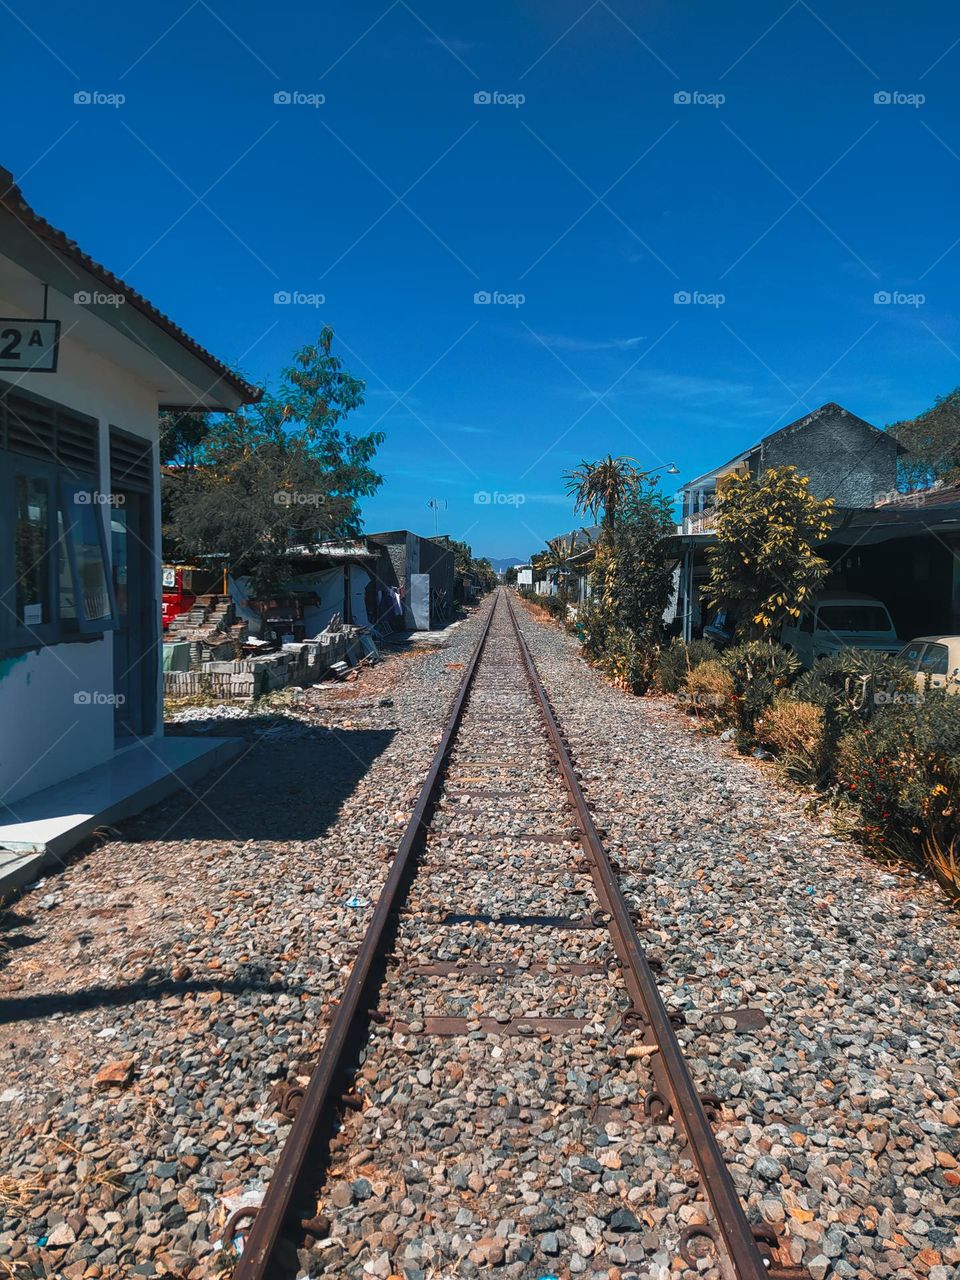 This is a railroad track in jombor, sukoharjo, indonesia. This rail is only used for the Batara Kresna Tourist Train for the Solo City, Sukoharjo regency to Wonogiri Regency